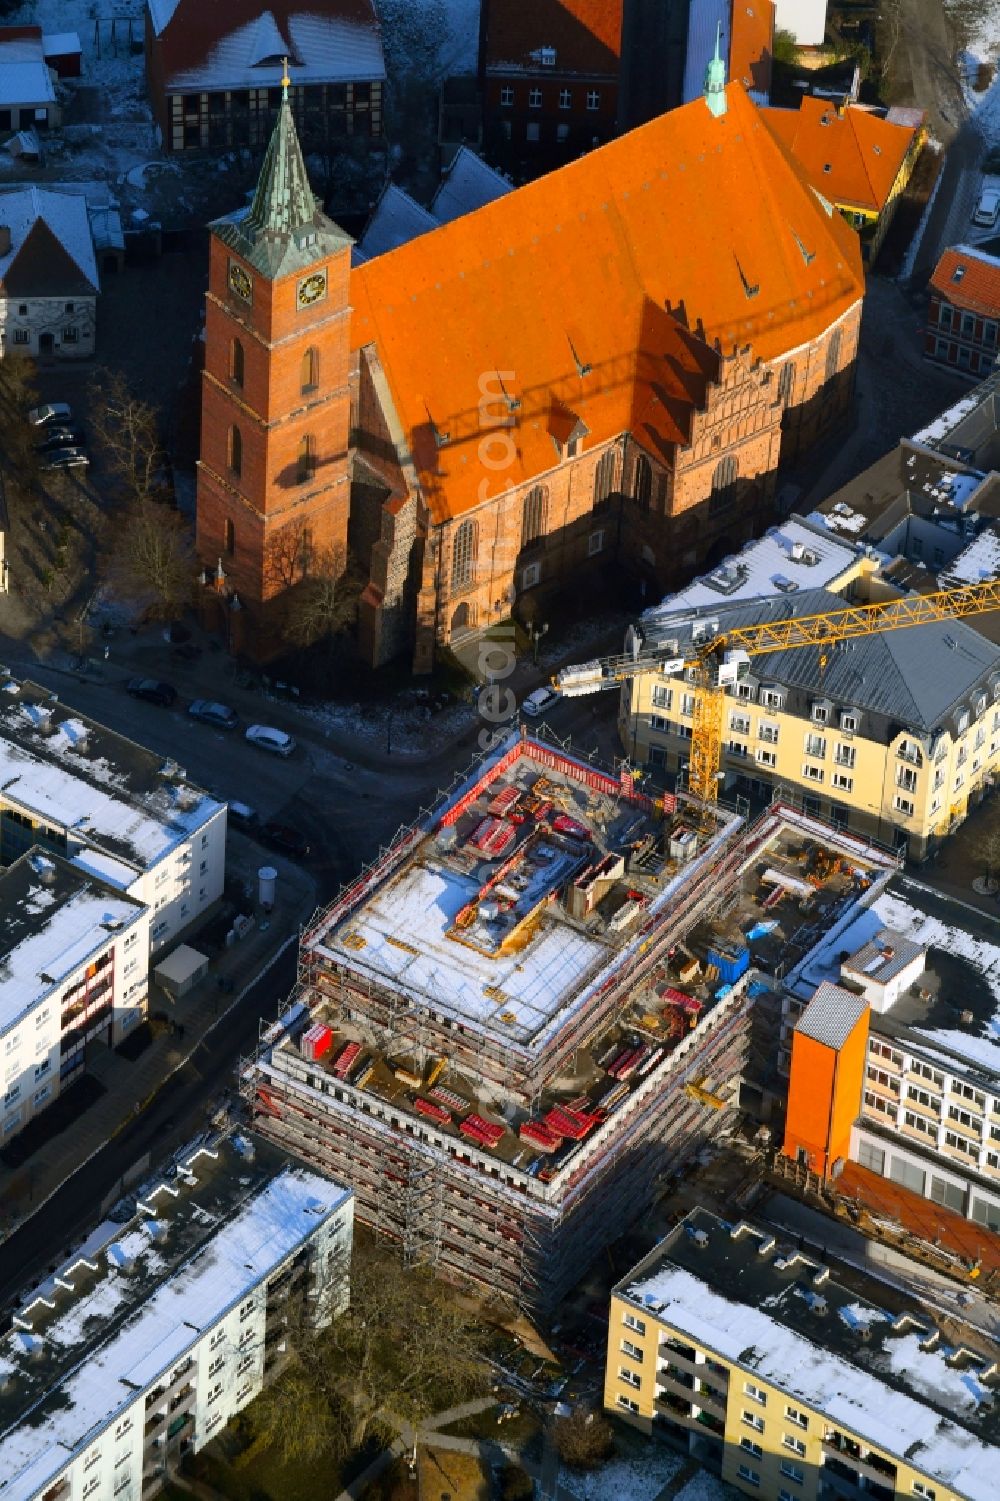 Bernau from above - Wintry snowy construction site of Town Hall building of the city administration Gruenstrasse corner Buergermeisterstrasse in Bernau in the state Brandenburg, Germany